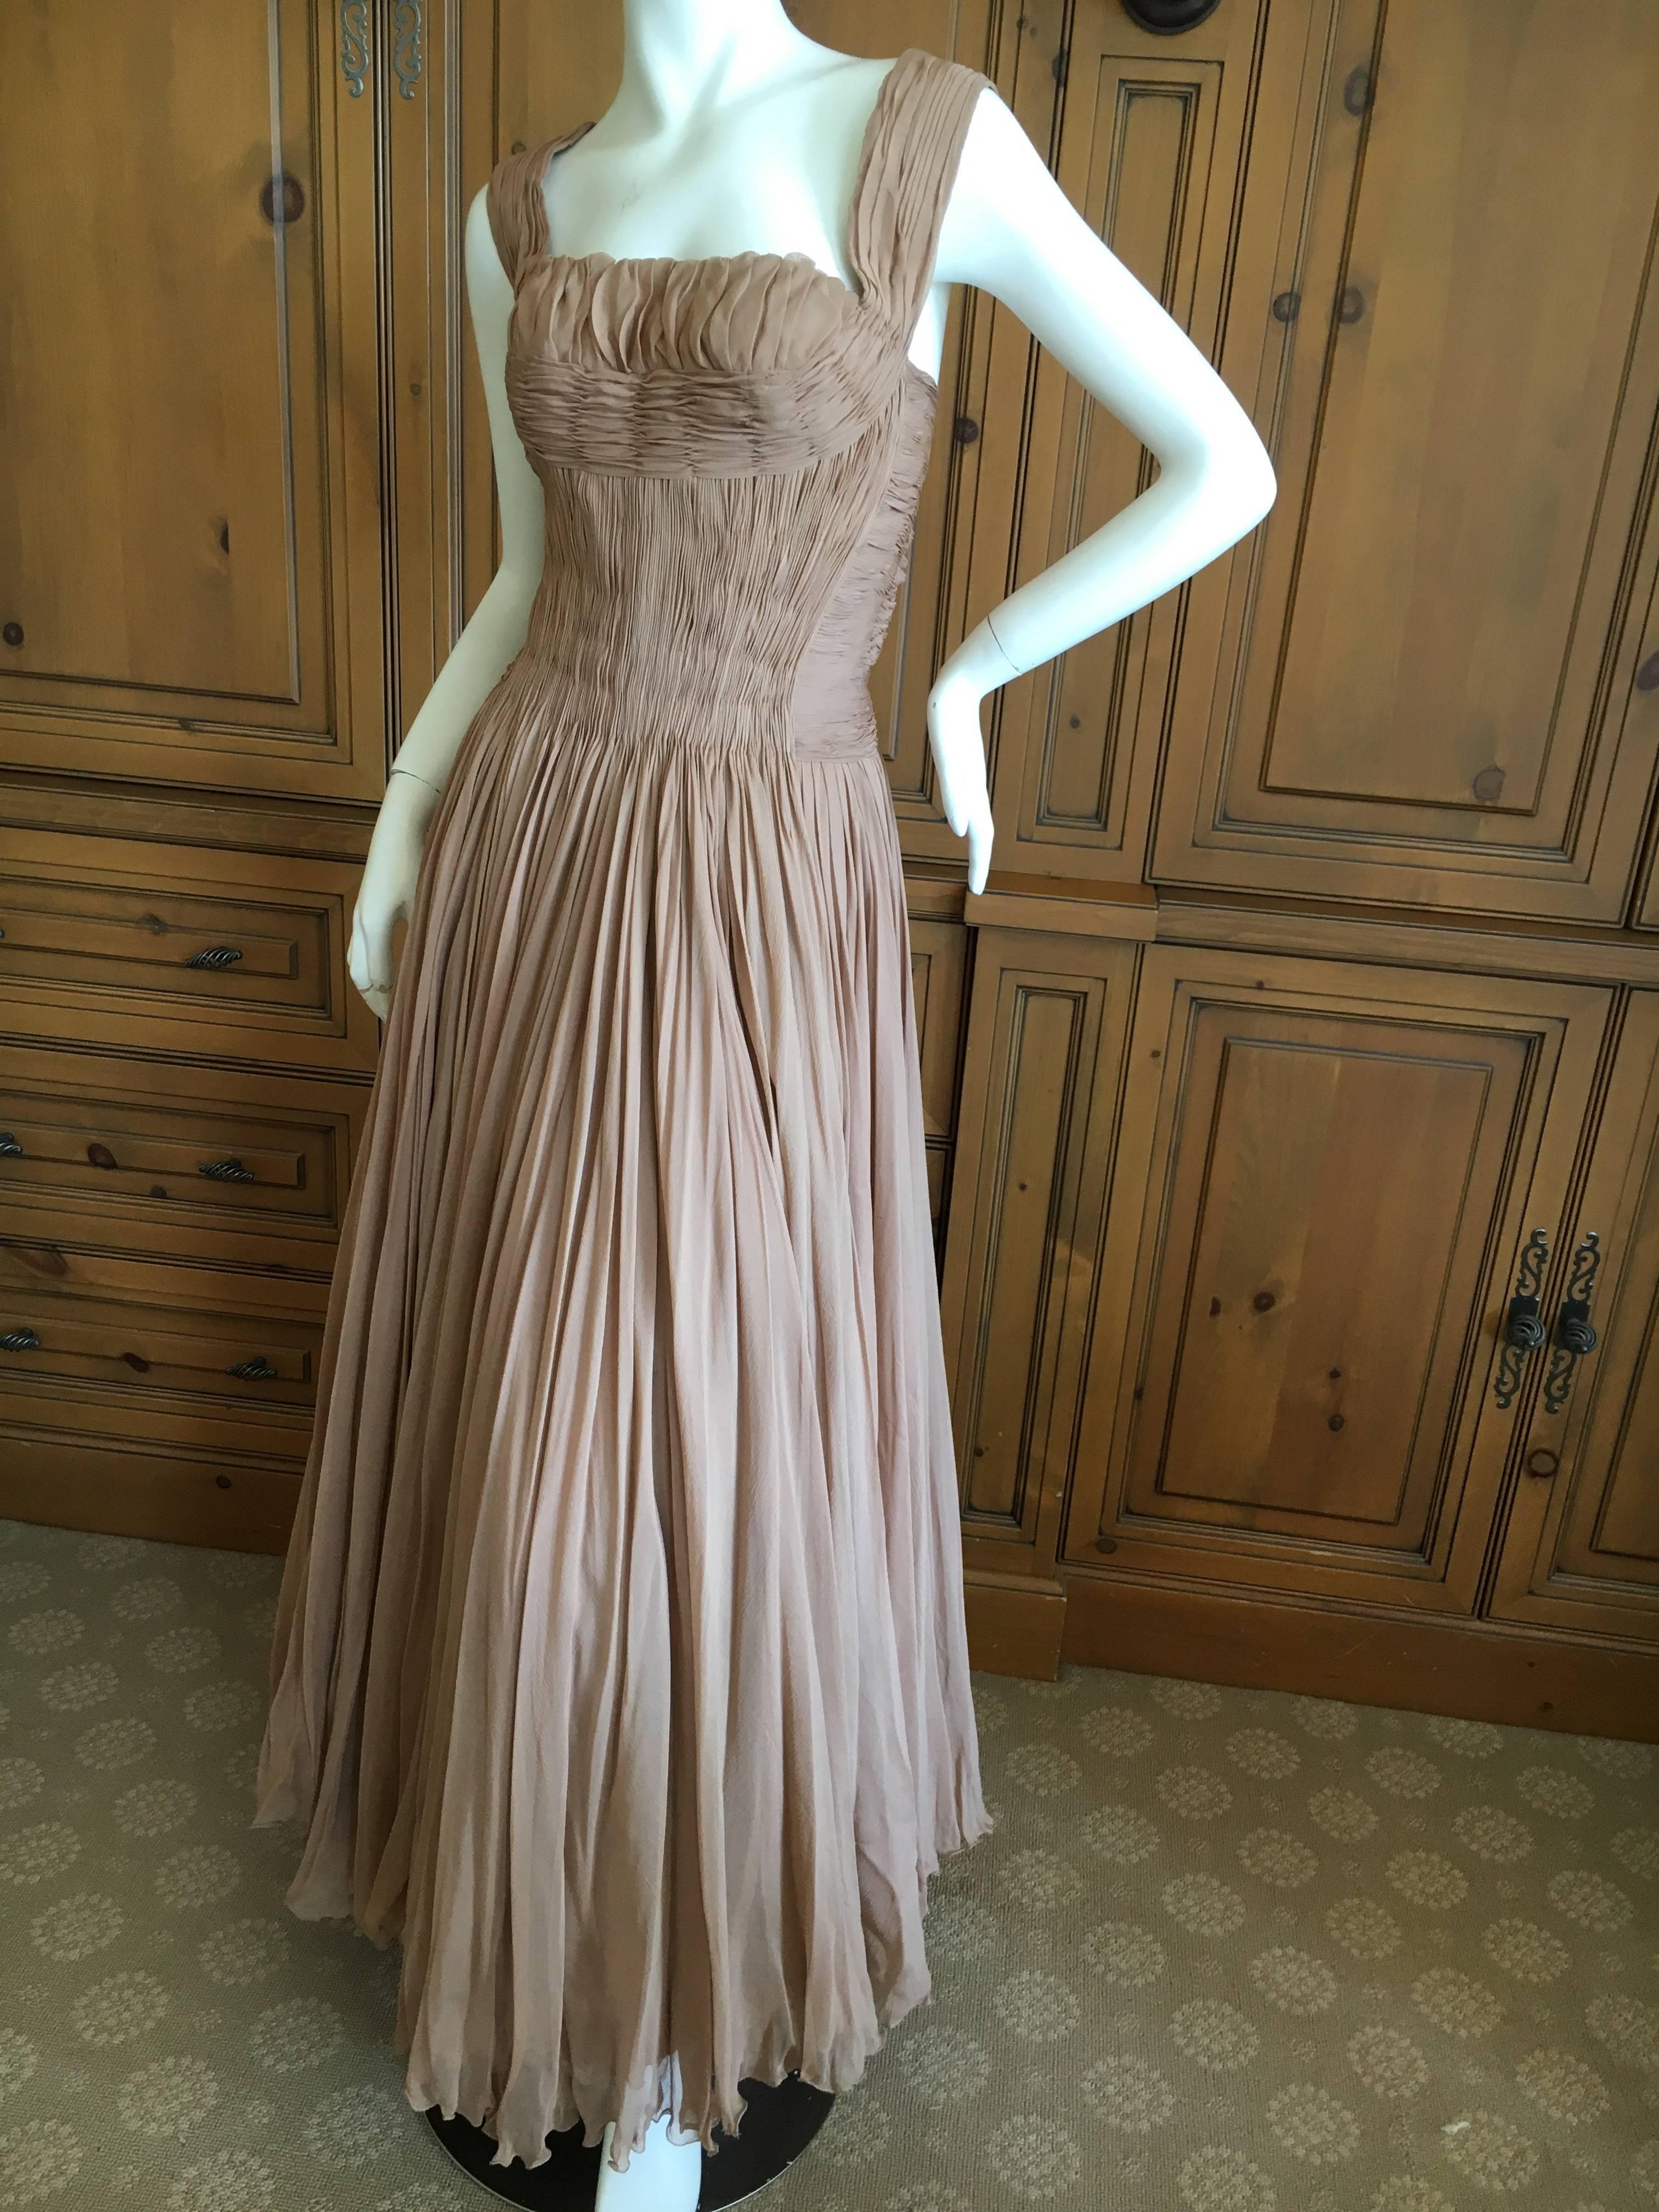 Carven Paris Haute Couture 1949 Pin Tuck Pleated Evening Dress For Sale 1